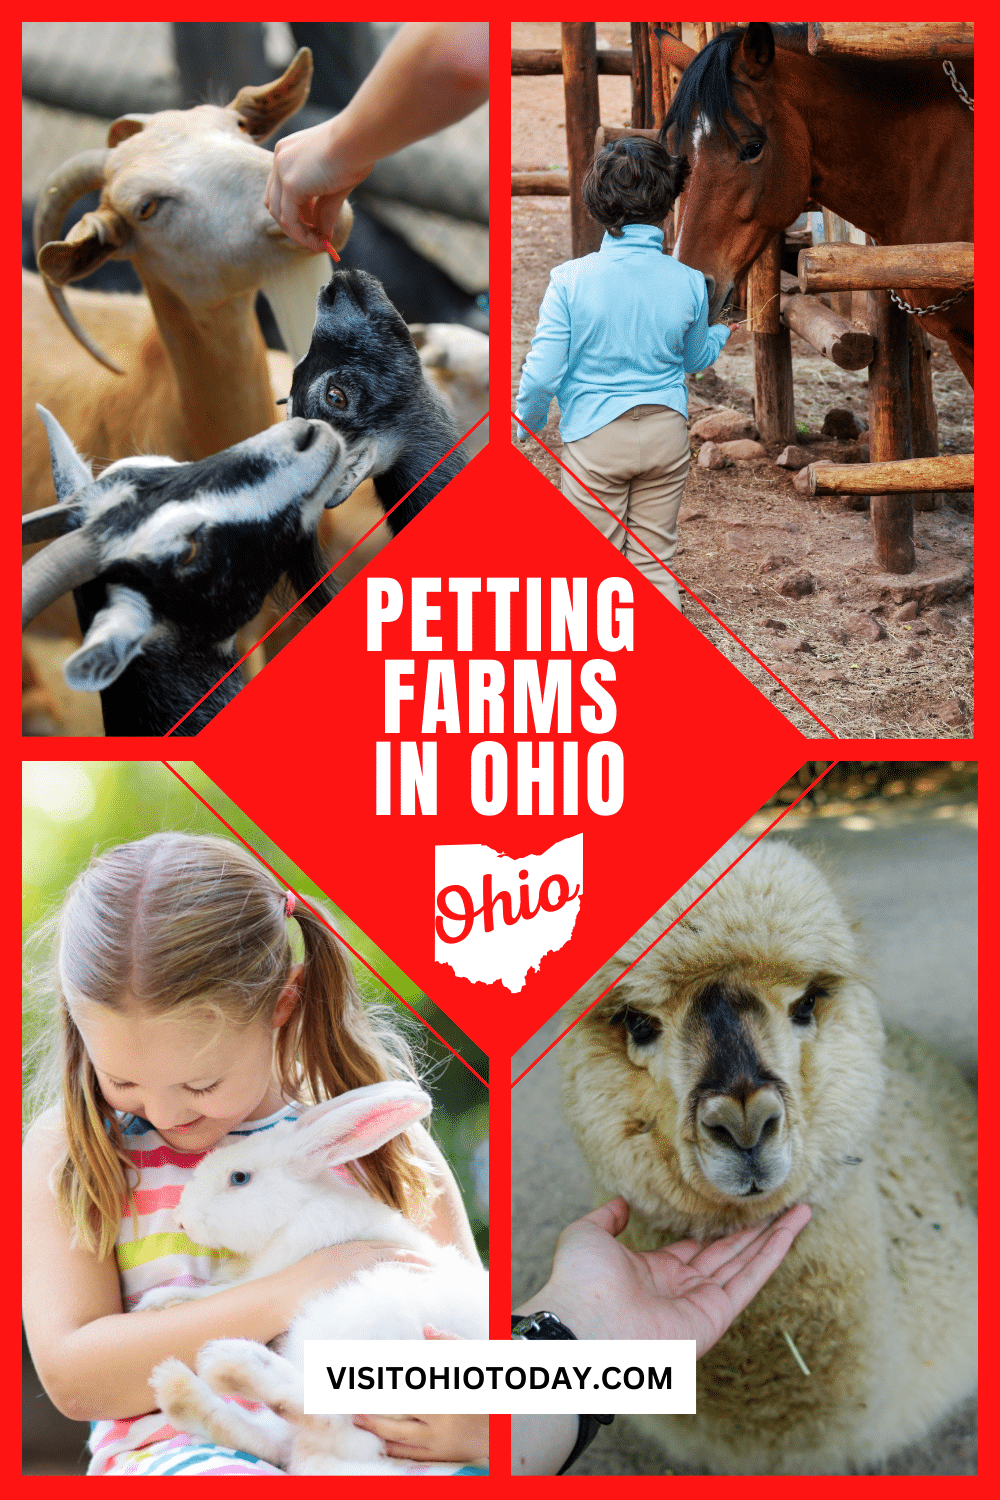 Petting Farms in Ohio are some of the best places you can ever visit. Not only are they full of wonderful animals, but they are also educational as well. The kids will enjoy the interaction with the animals at the petting farms.